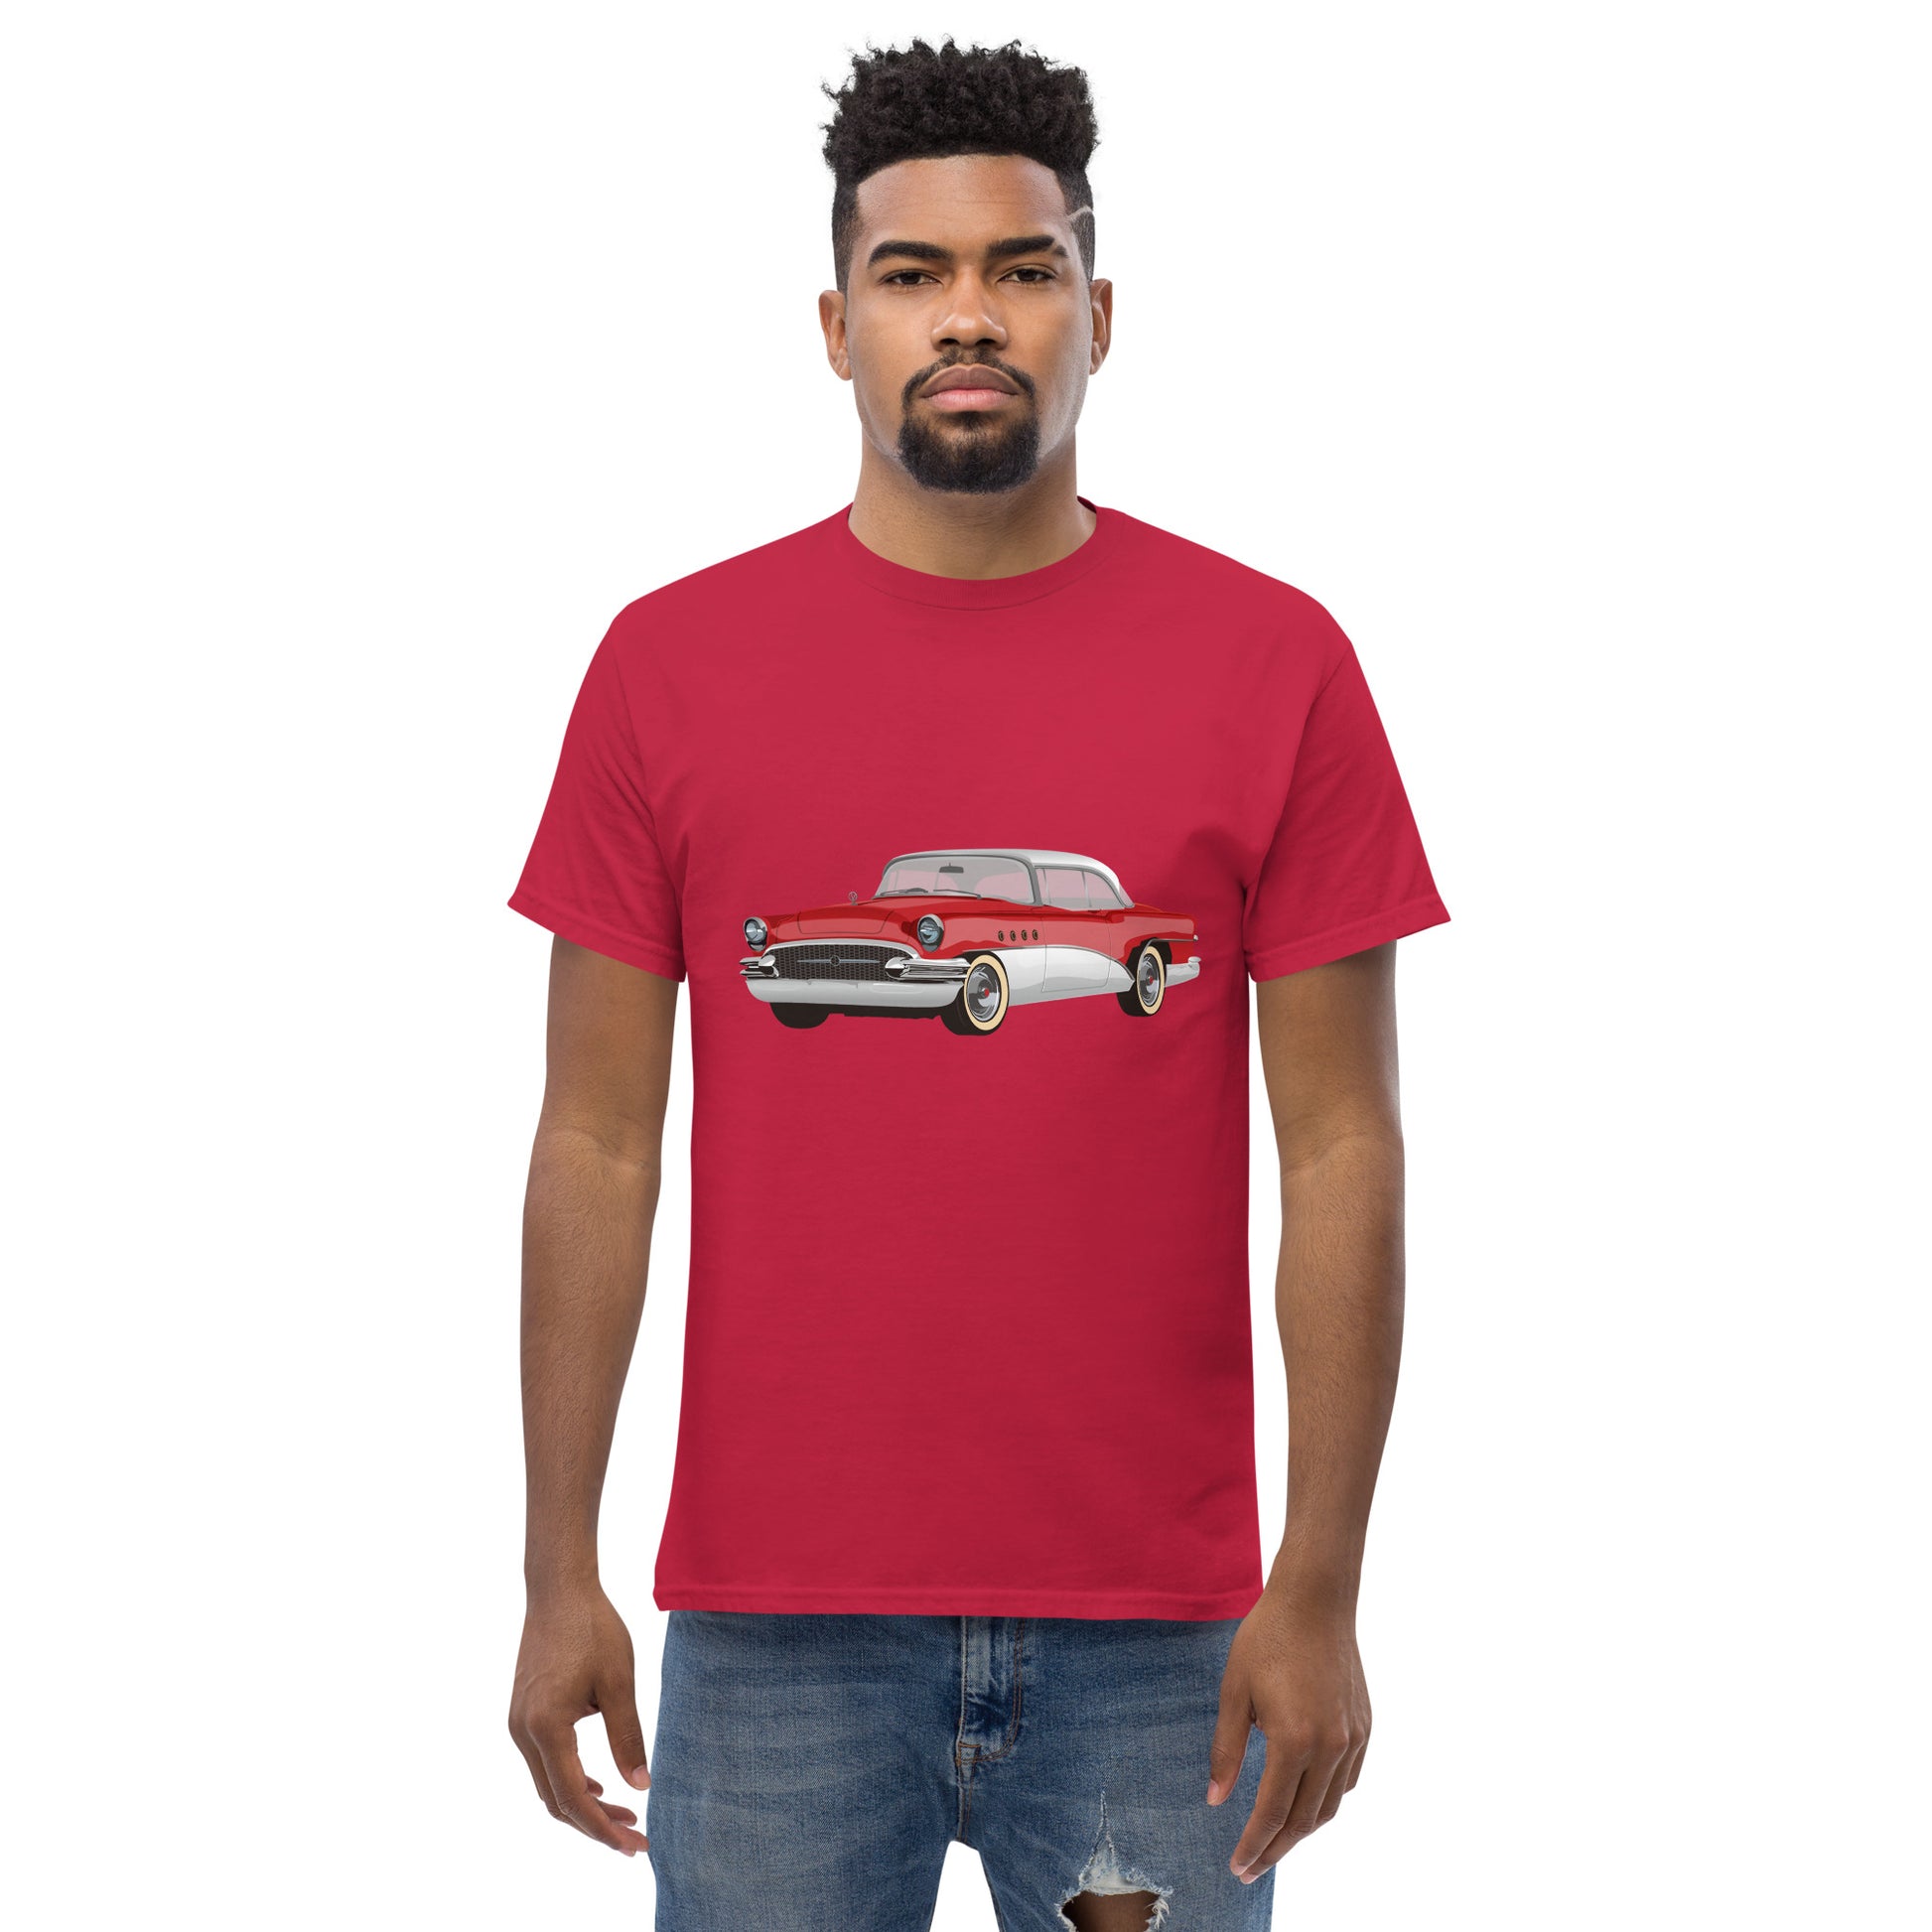 Men with cardinal red t-shirt with red Chevrolet 